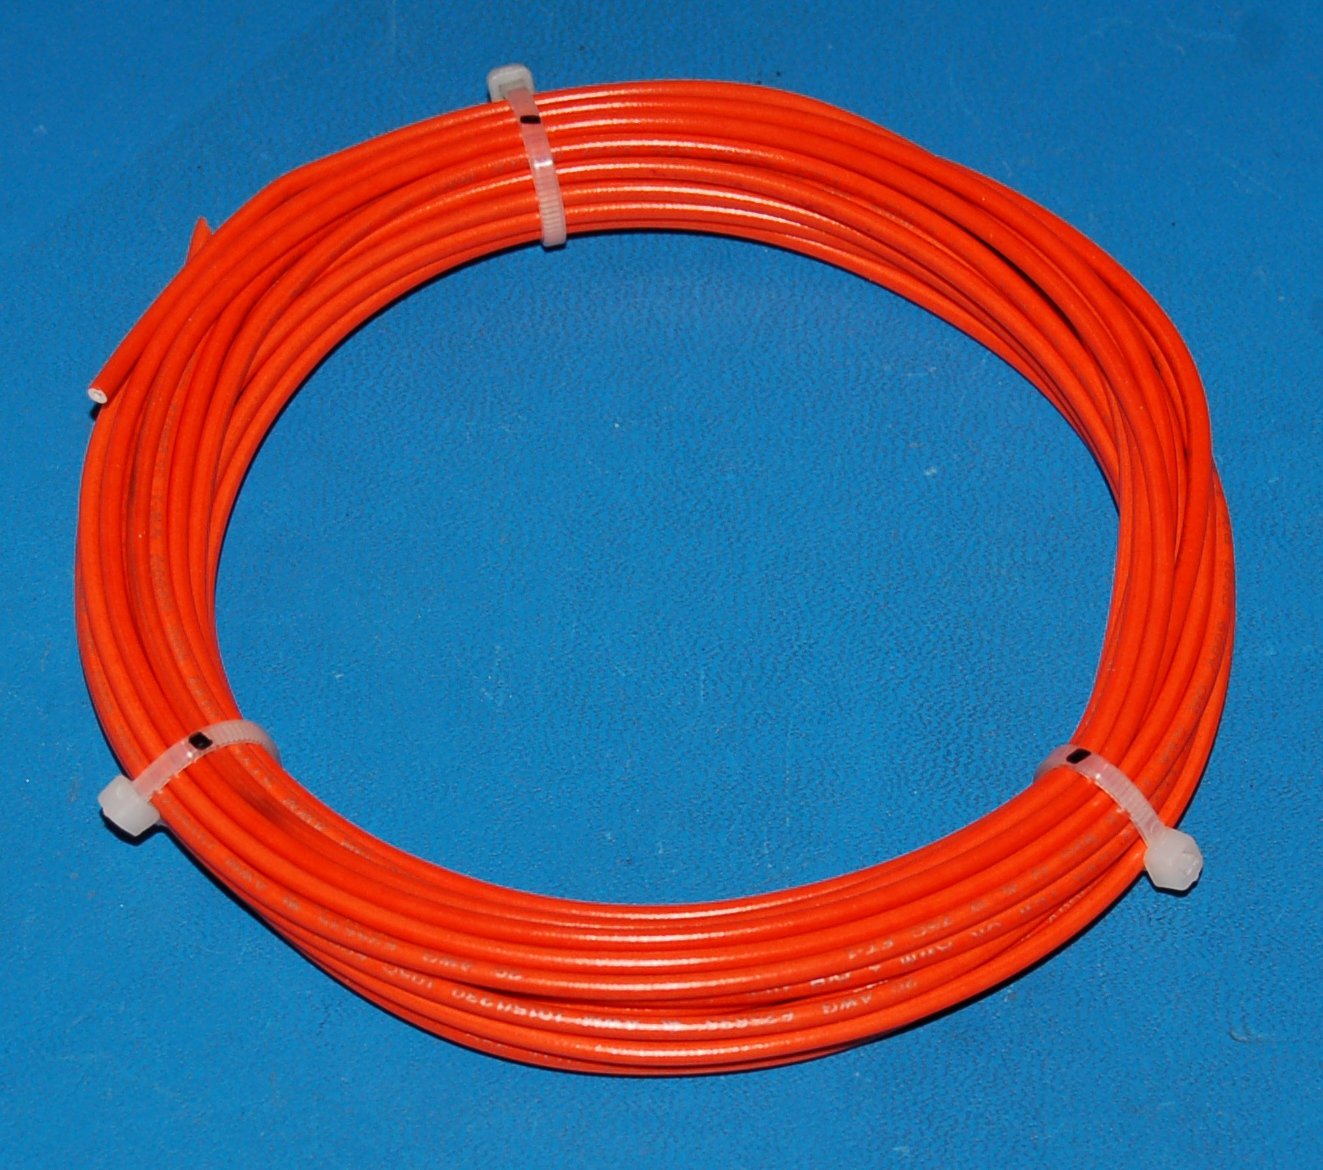 Solid Tinned Copper Wire, 600V, #20 AWG x 25' (Orange) - Click Image to Close